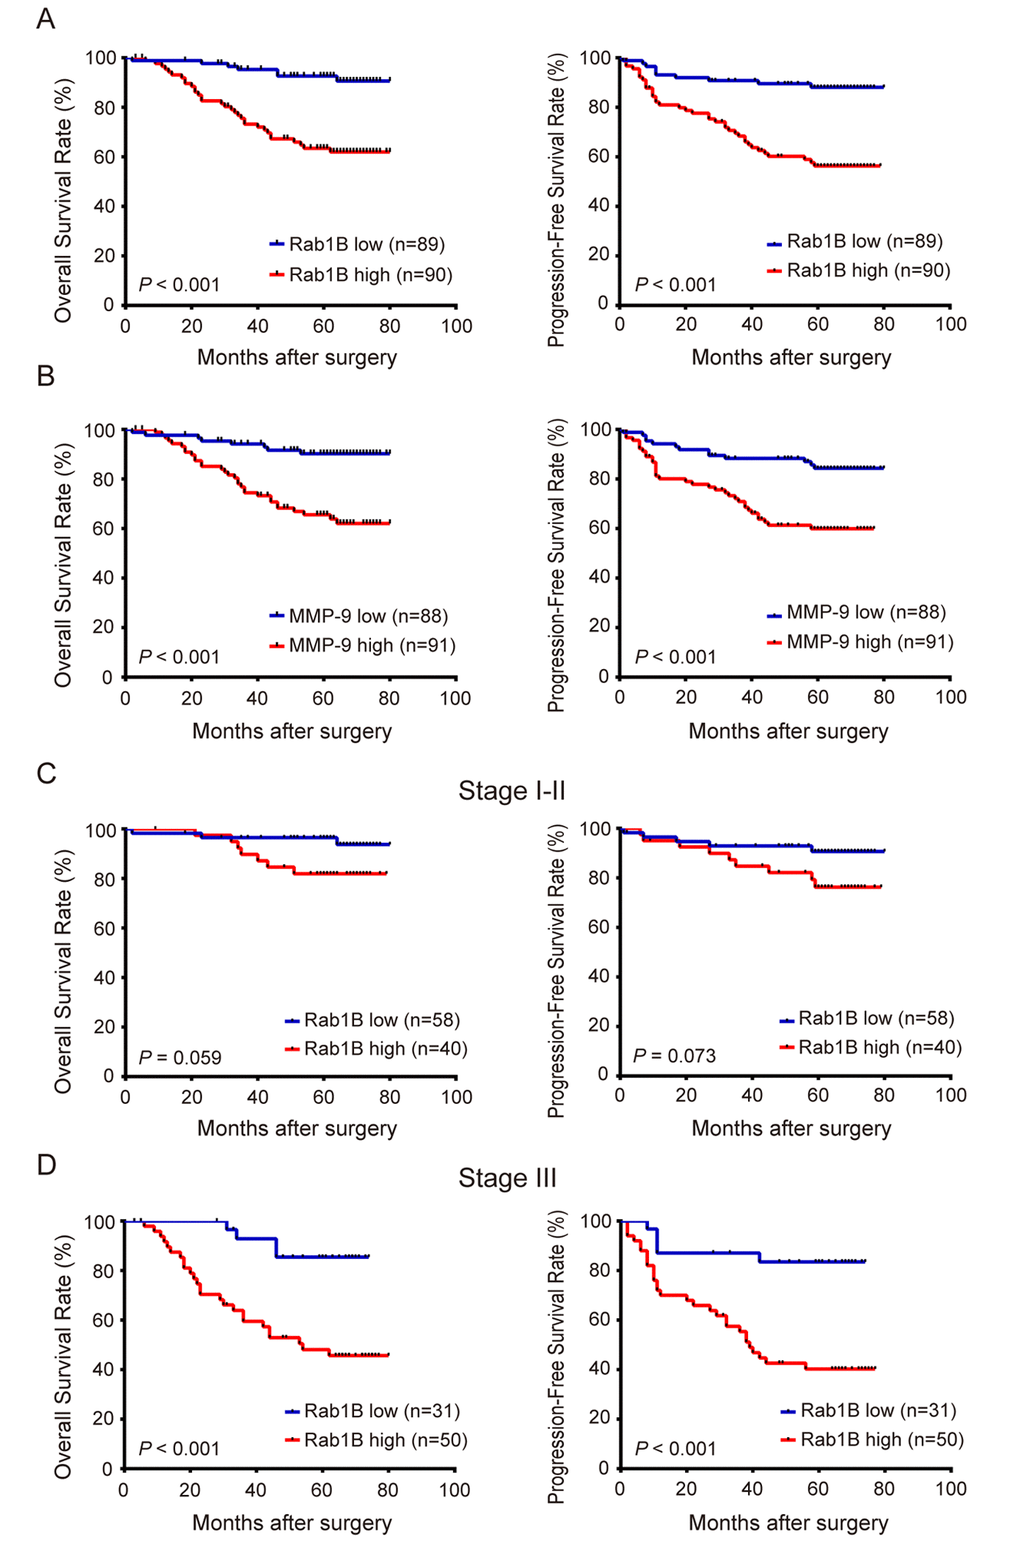 Overexpression ofRab1B and MMP9 proteins are associated with poor prognosis of CRC patients independent of clinical stage. (A) The overall survival (OS) and progression-free survival (PFS) of CRC patients with high or low Rab1B expression. P value was calculated by Log-rank test. (B) OS and PFS of patients with high or low MMP9 expression. (C) OS and PFS of stage I-II CRC patients with high or low Rab1B expression. (D) OS and PFS of stage III CRC patients with high or low Rab1B expression.